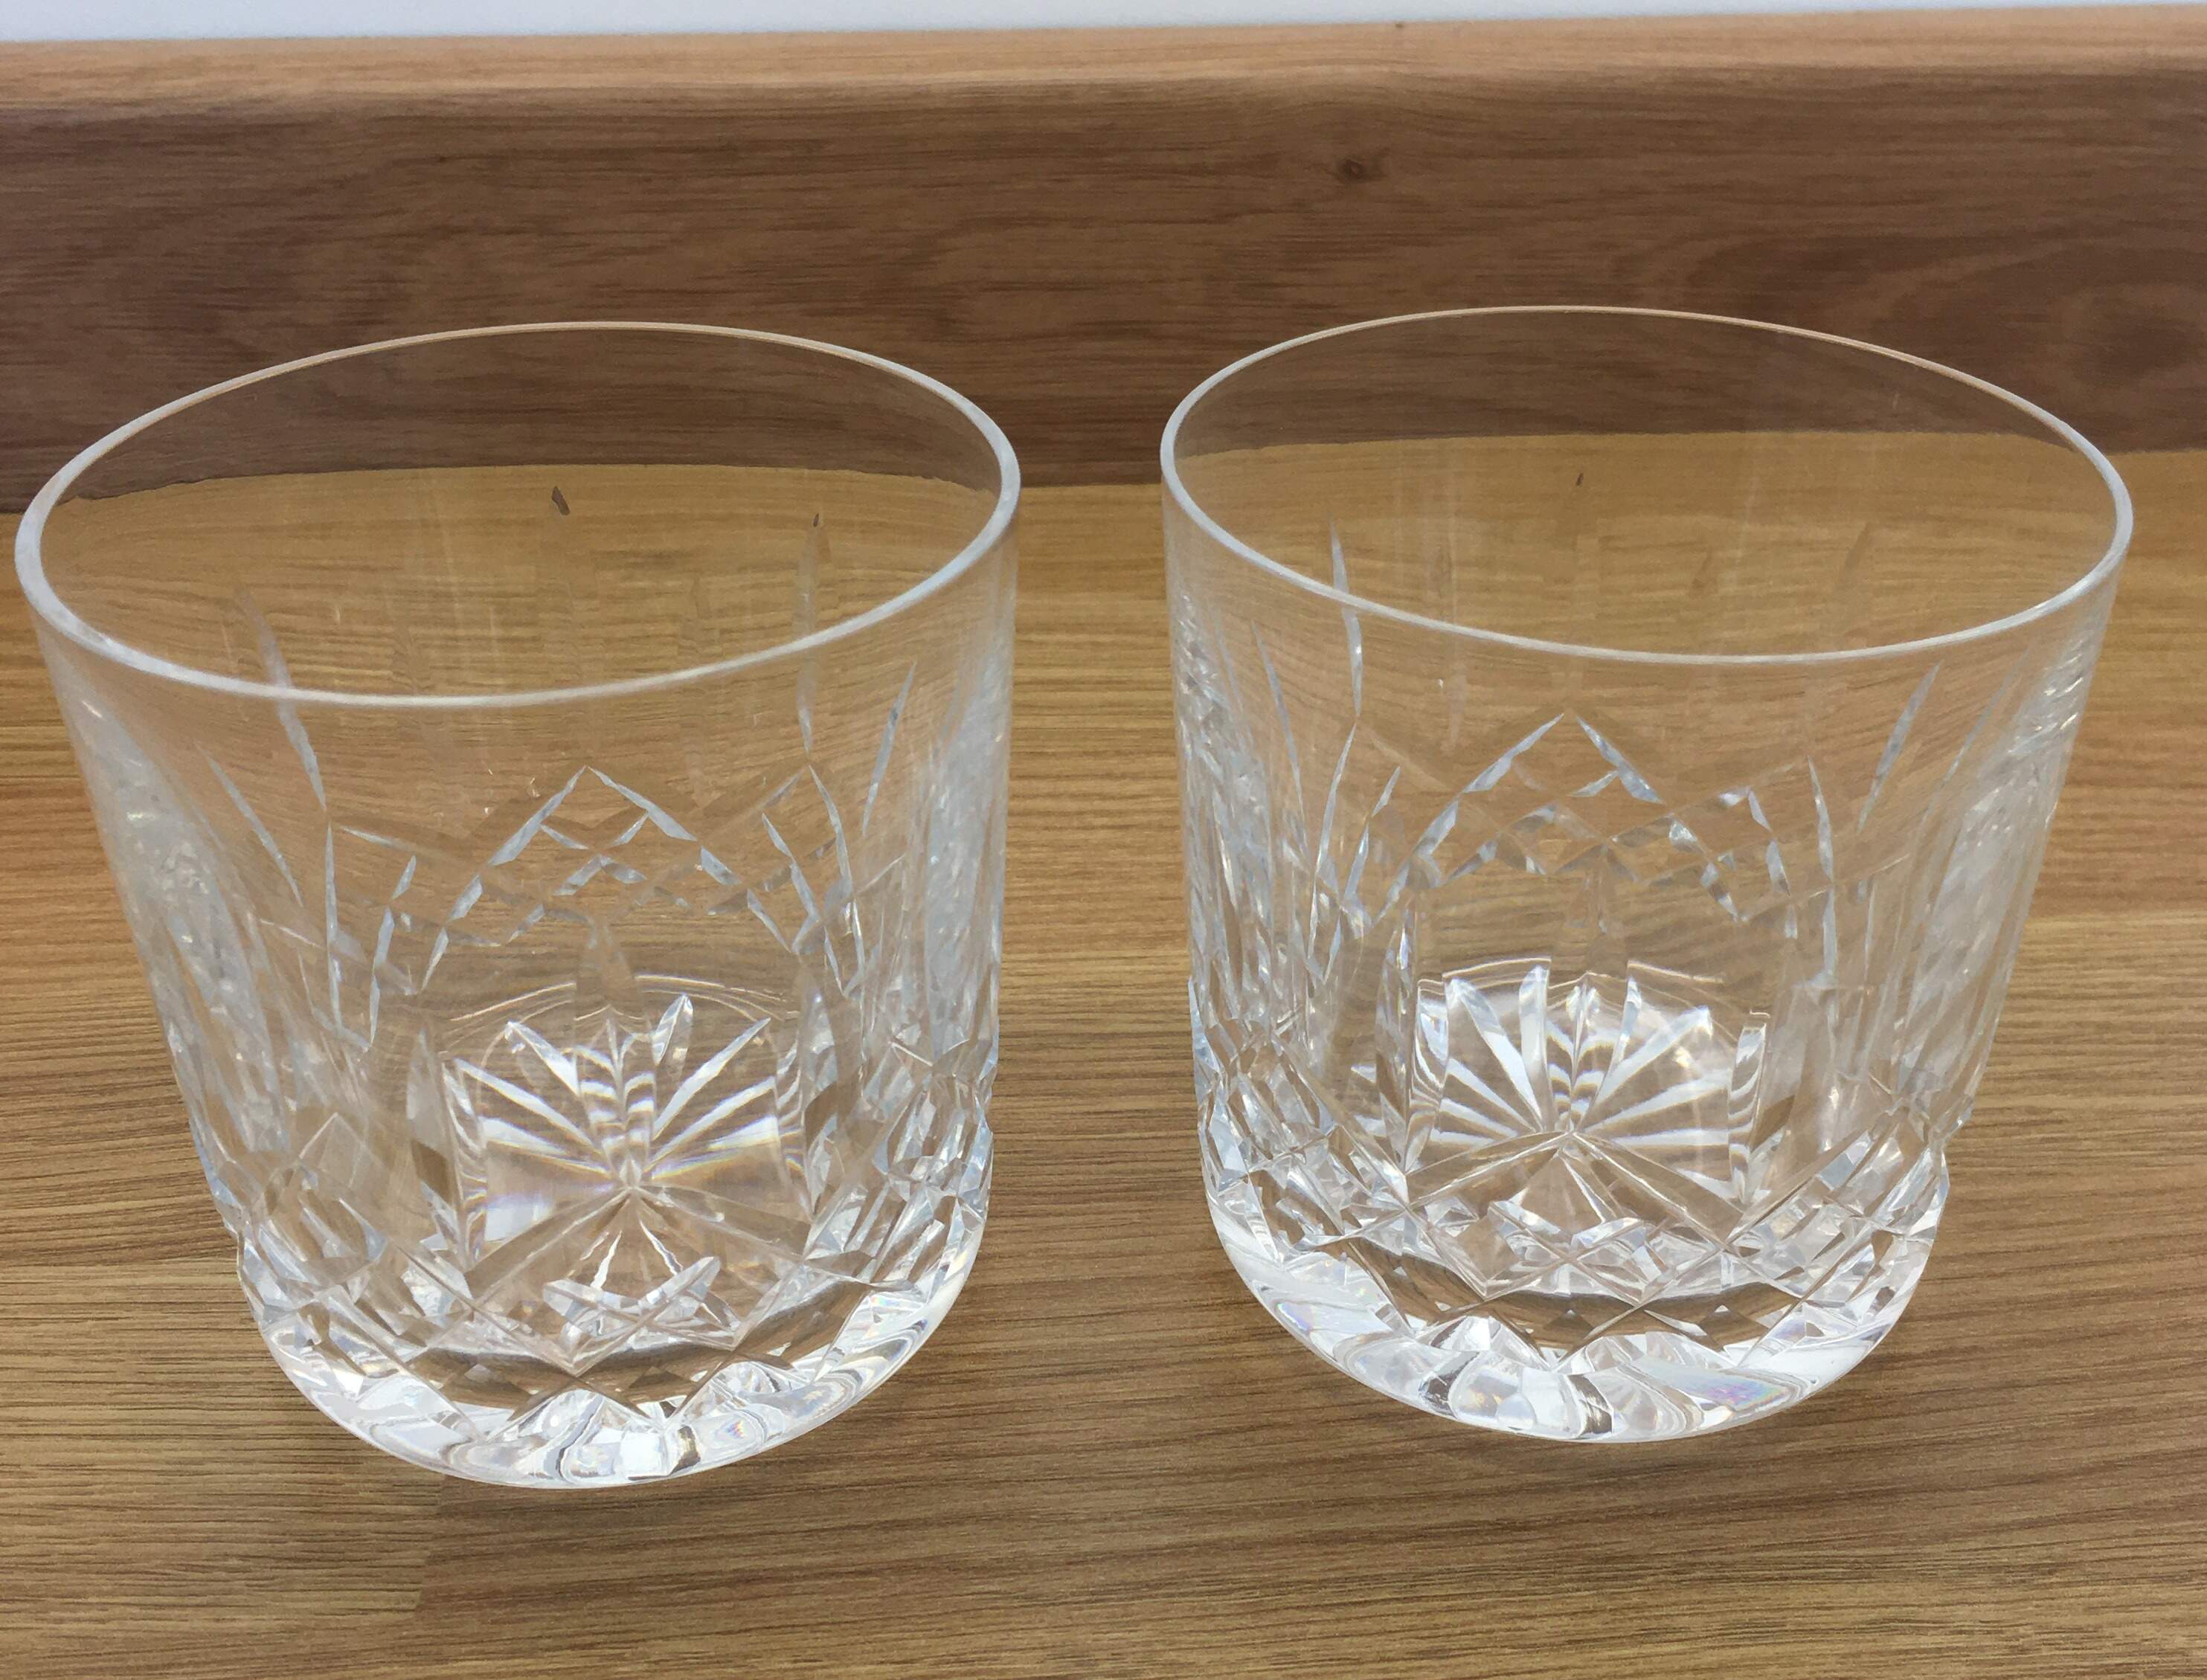 Pair of Waterford Lismore Whisky Tumblers  SOLD